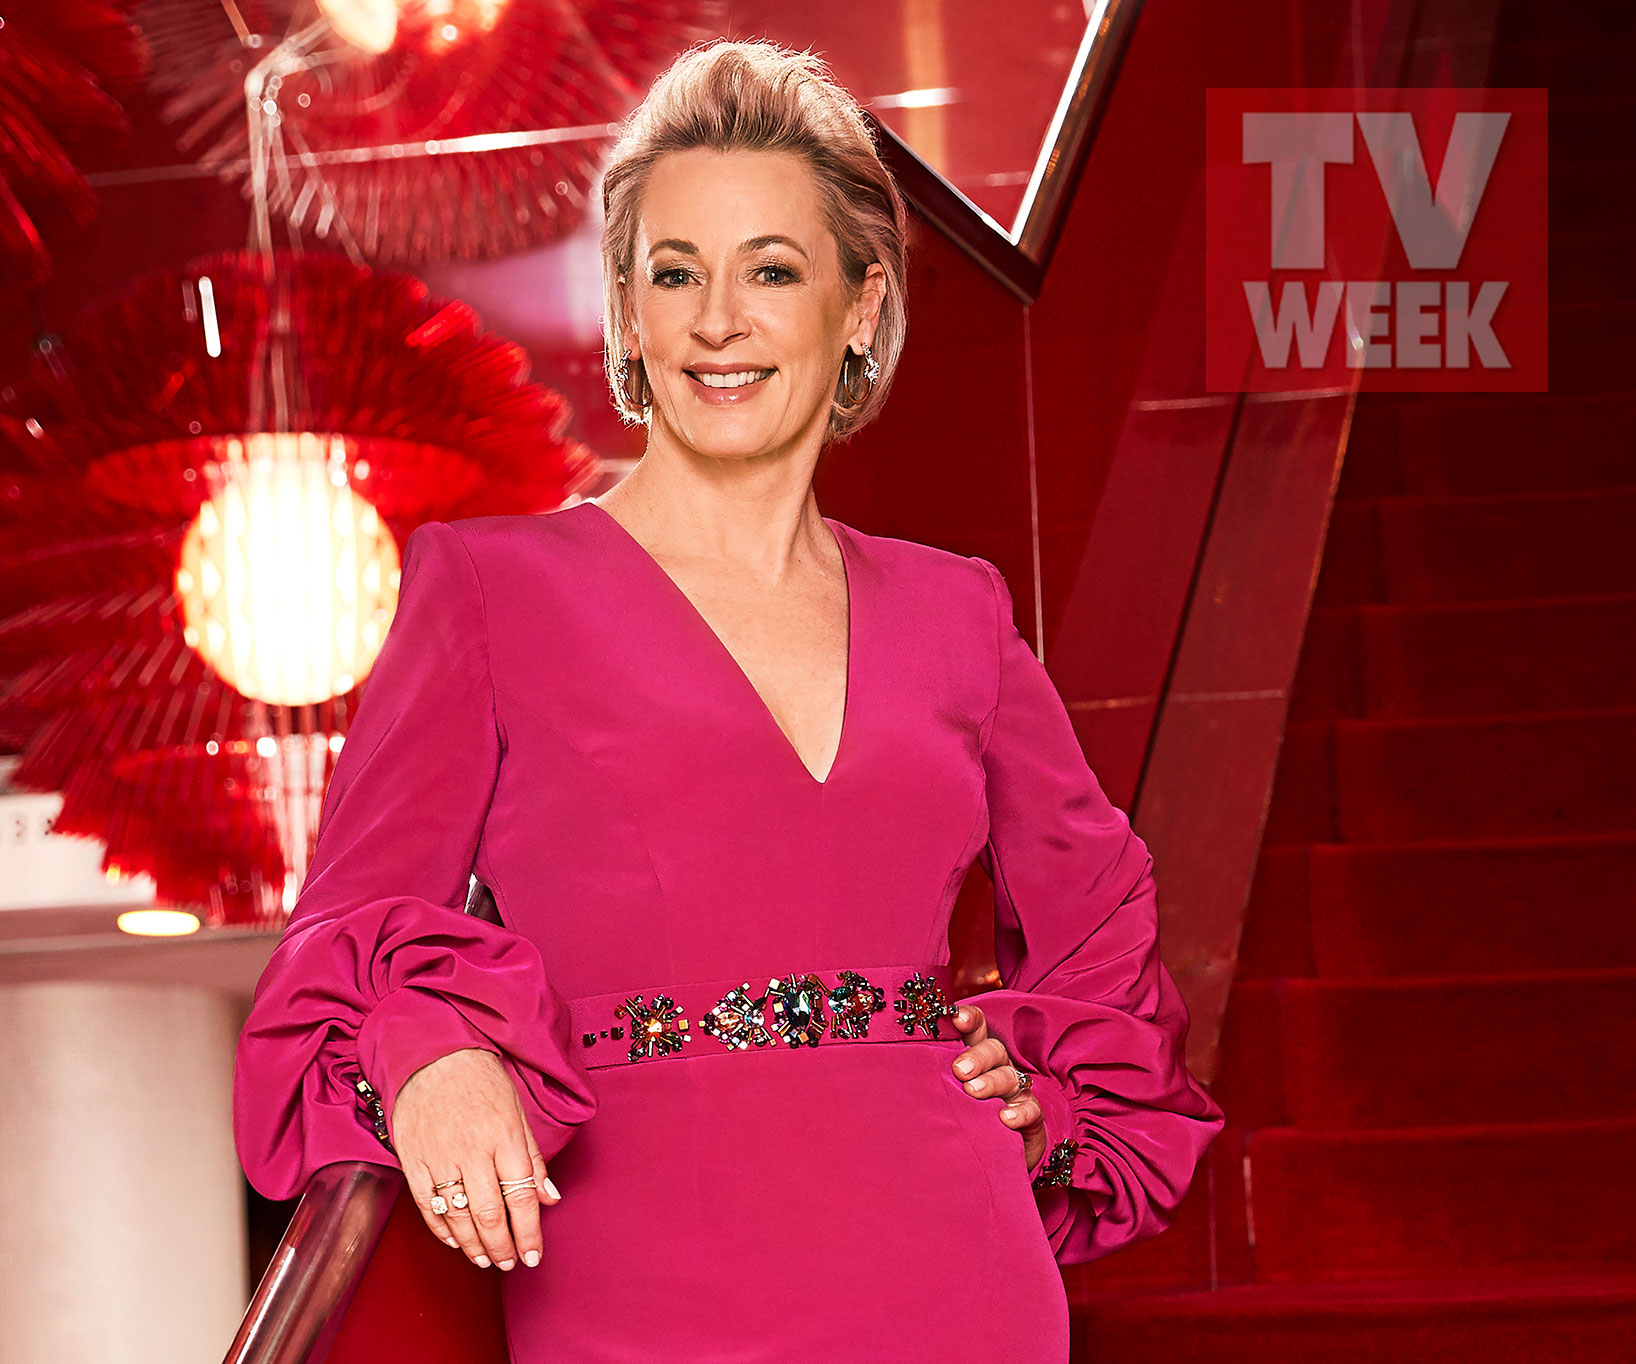 Life couldn’t be better for Gold Logie nominee Amanda Keller – now, there’s just one thing missing